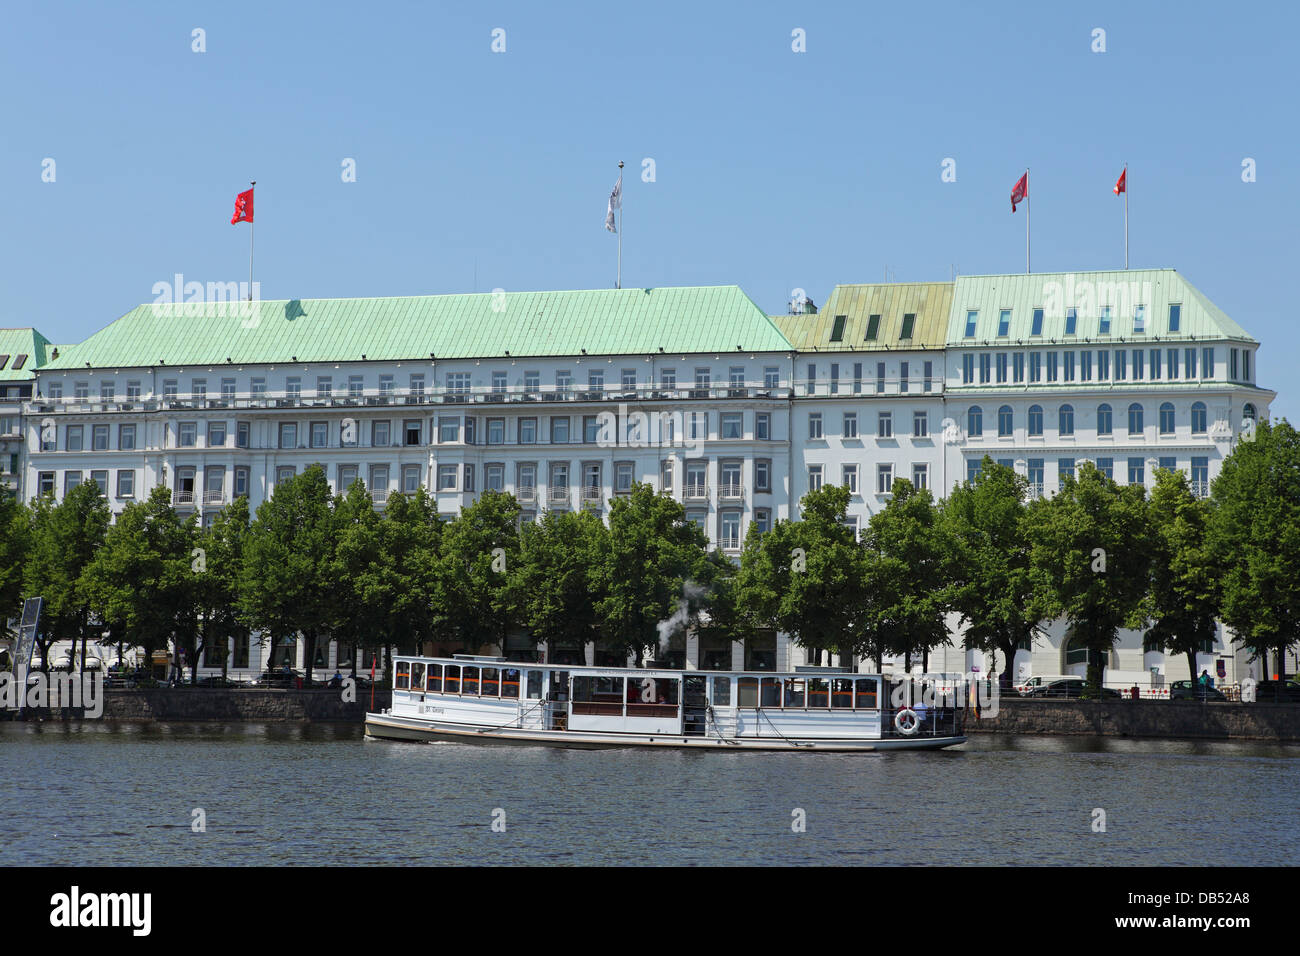 A boat cruises on the Inner Alster lake (Innenalster) in Hamburg, Germany. Stock Photo